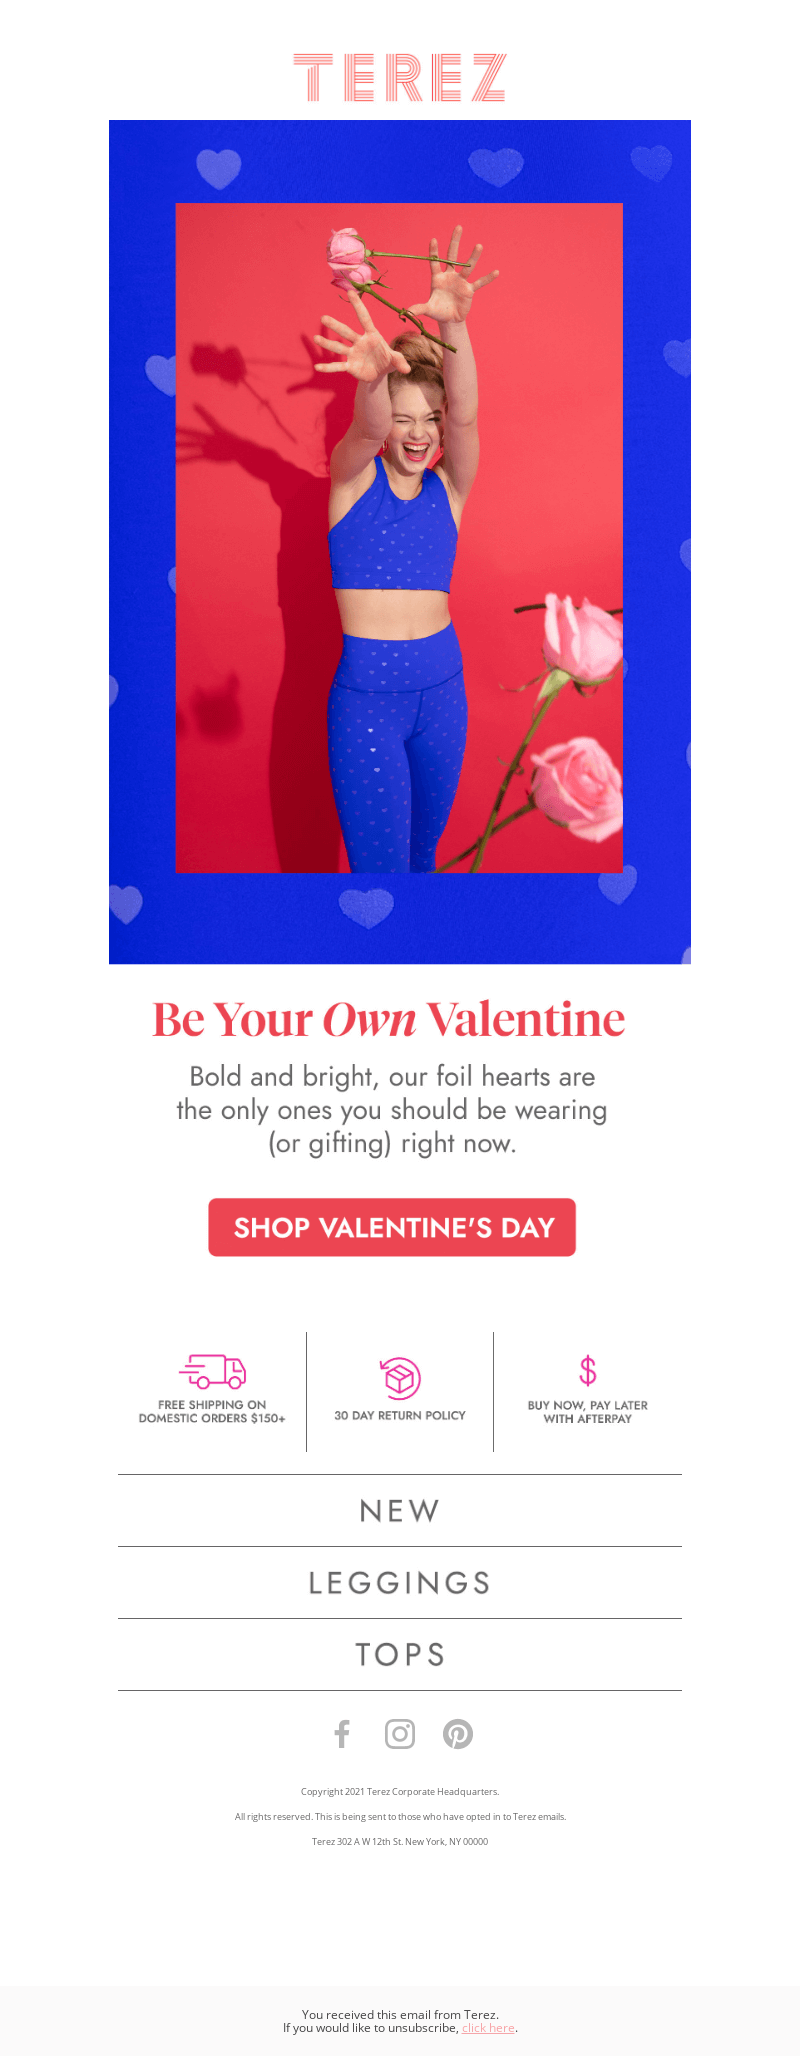 Valentine’s Day email from Terez with the banner text “Be Your Own Valentine”